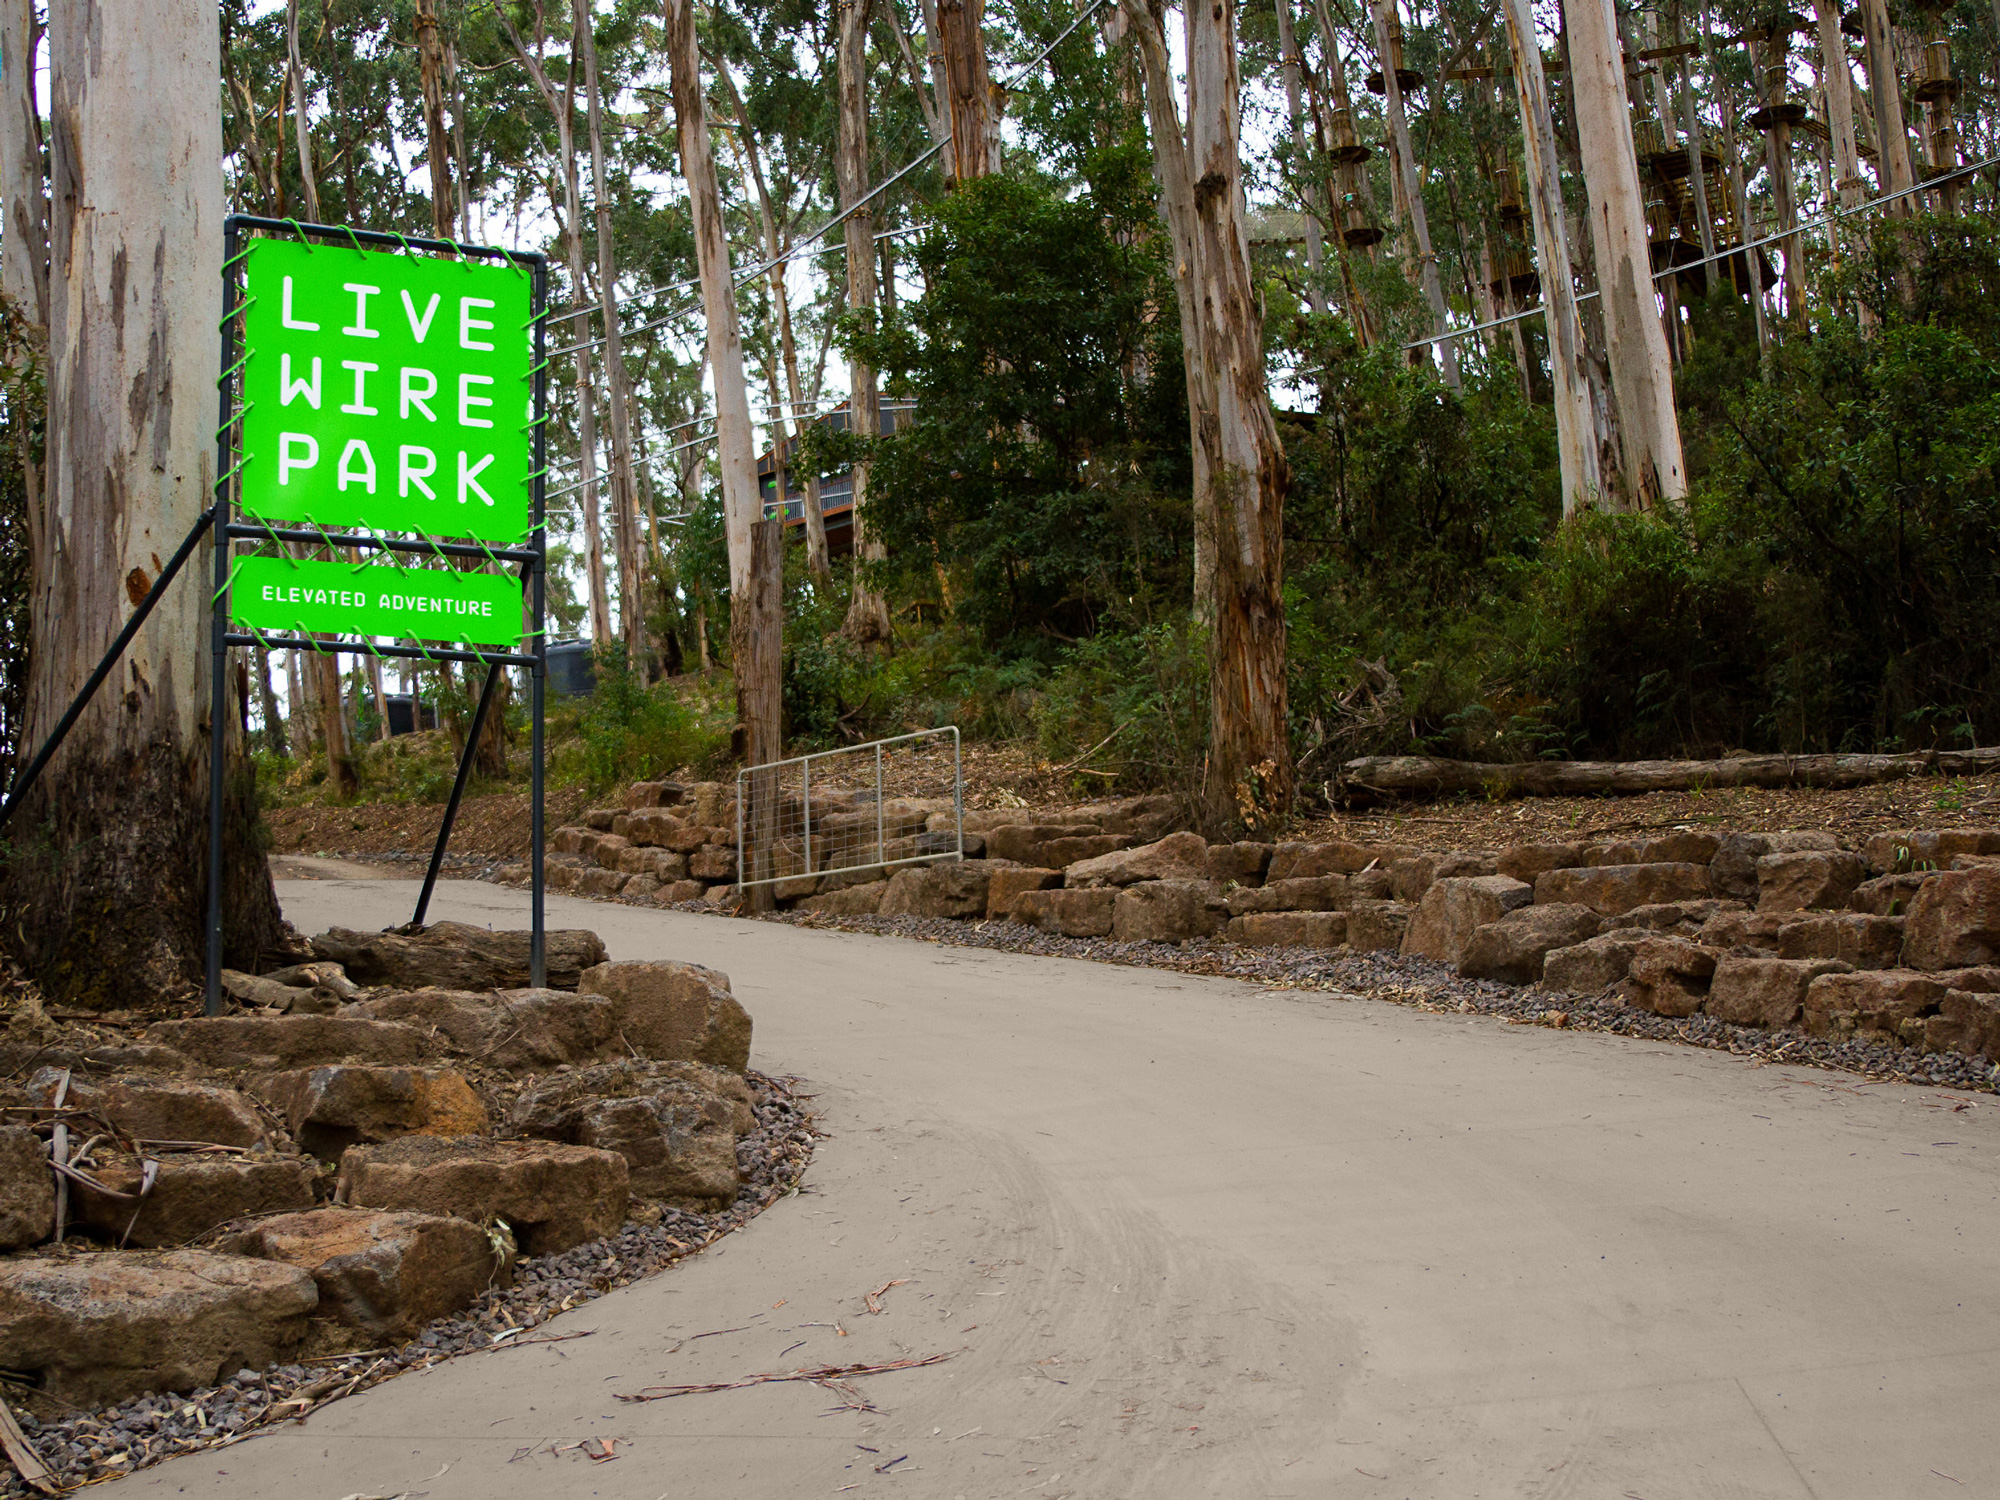 New Logo and Identity for Live Wire Park by Self-titled